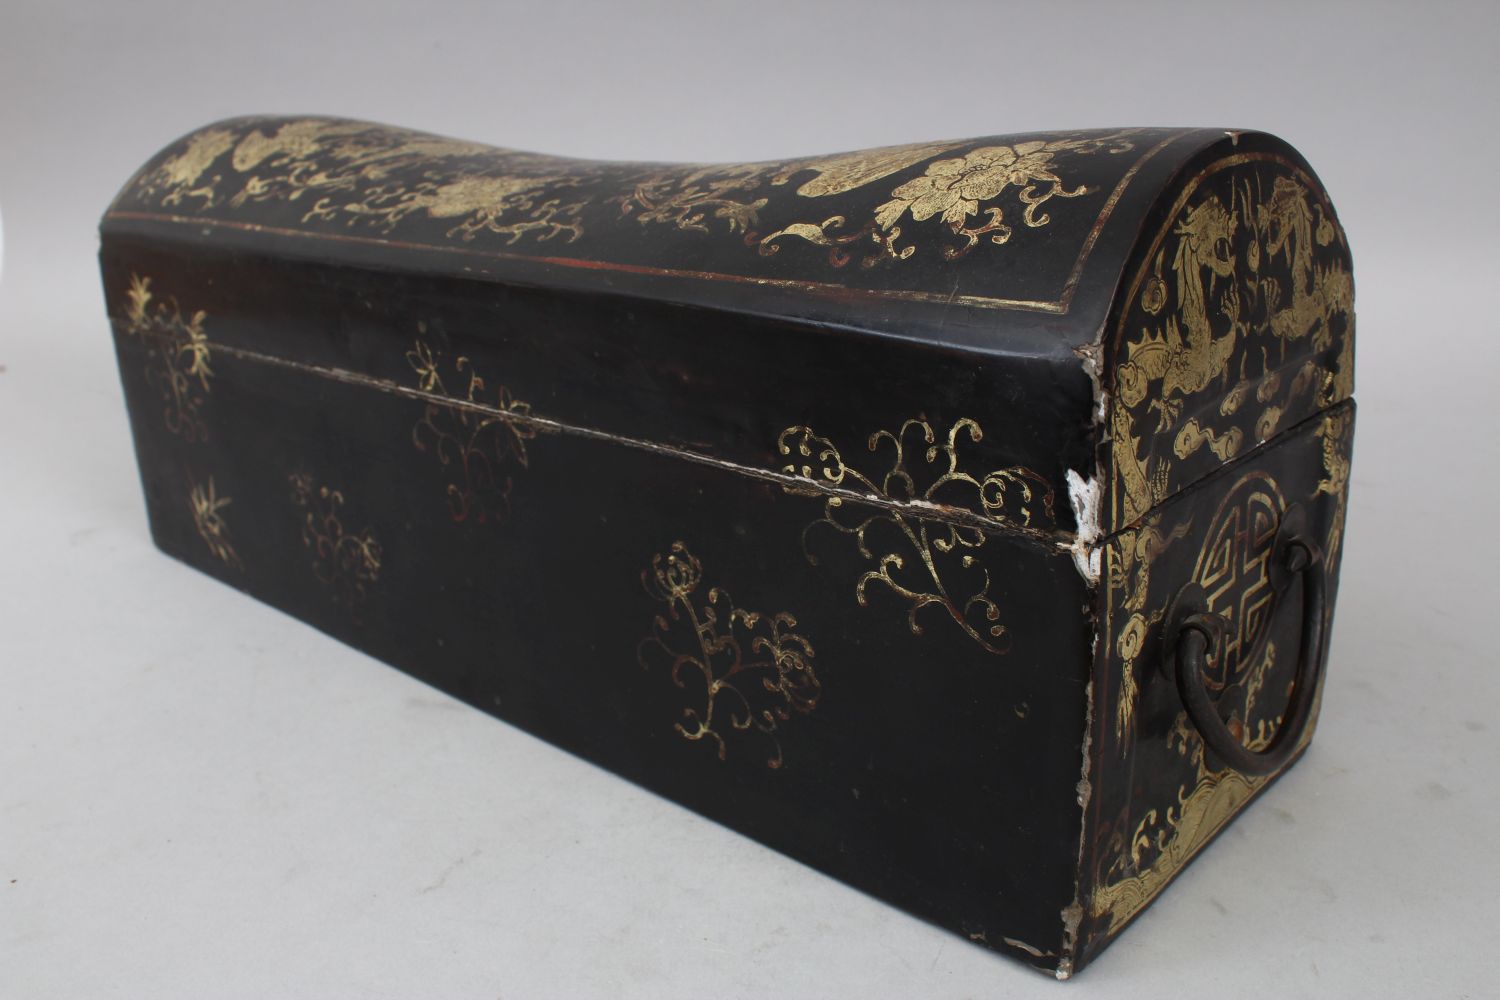 A GOOD 19TH CENTURY CHINESE LACQUER CHEST / BOX, the lacquer box with gilded decoration of dragons - Image 11 of 12